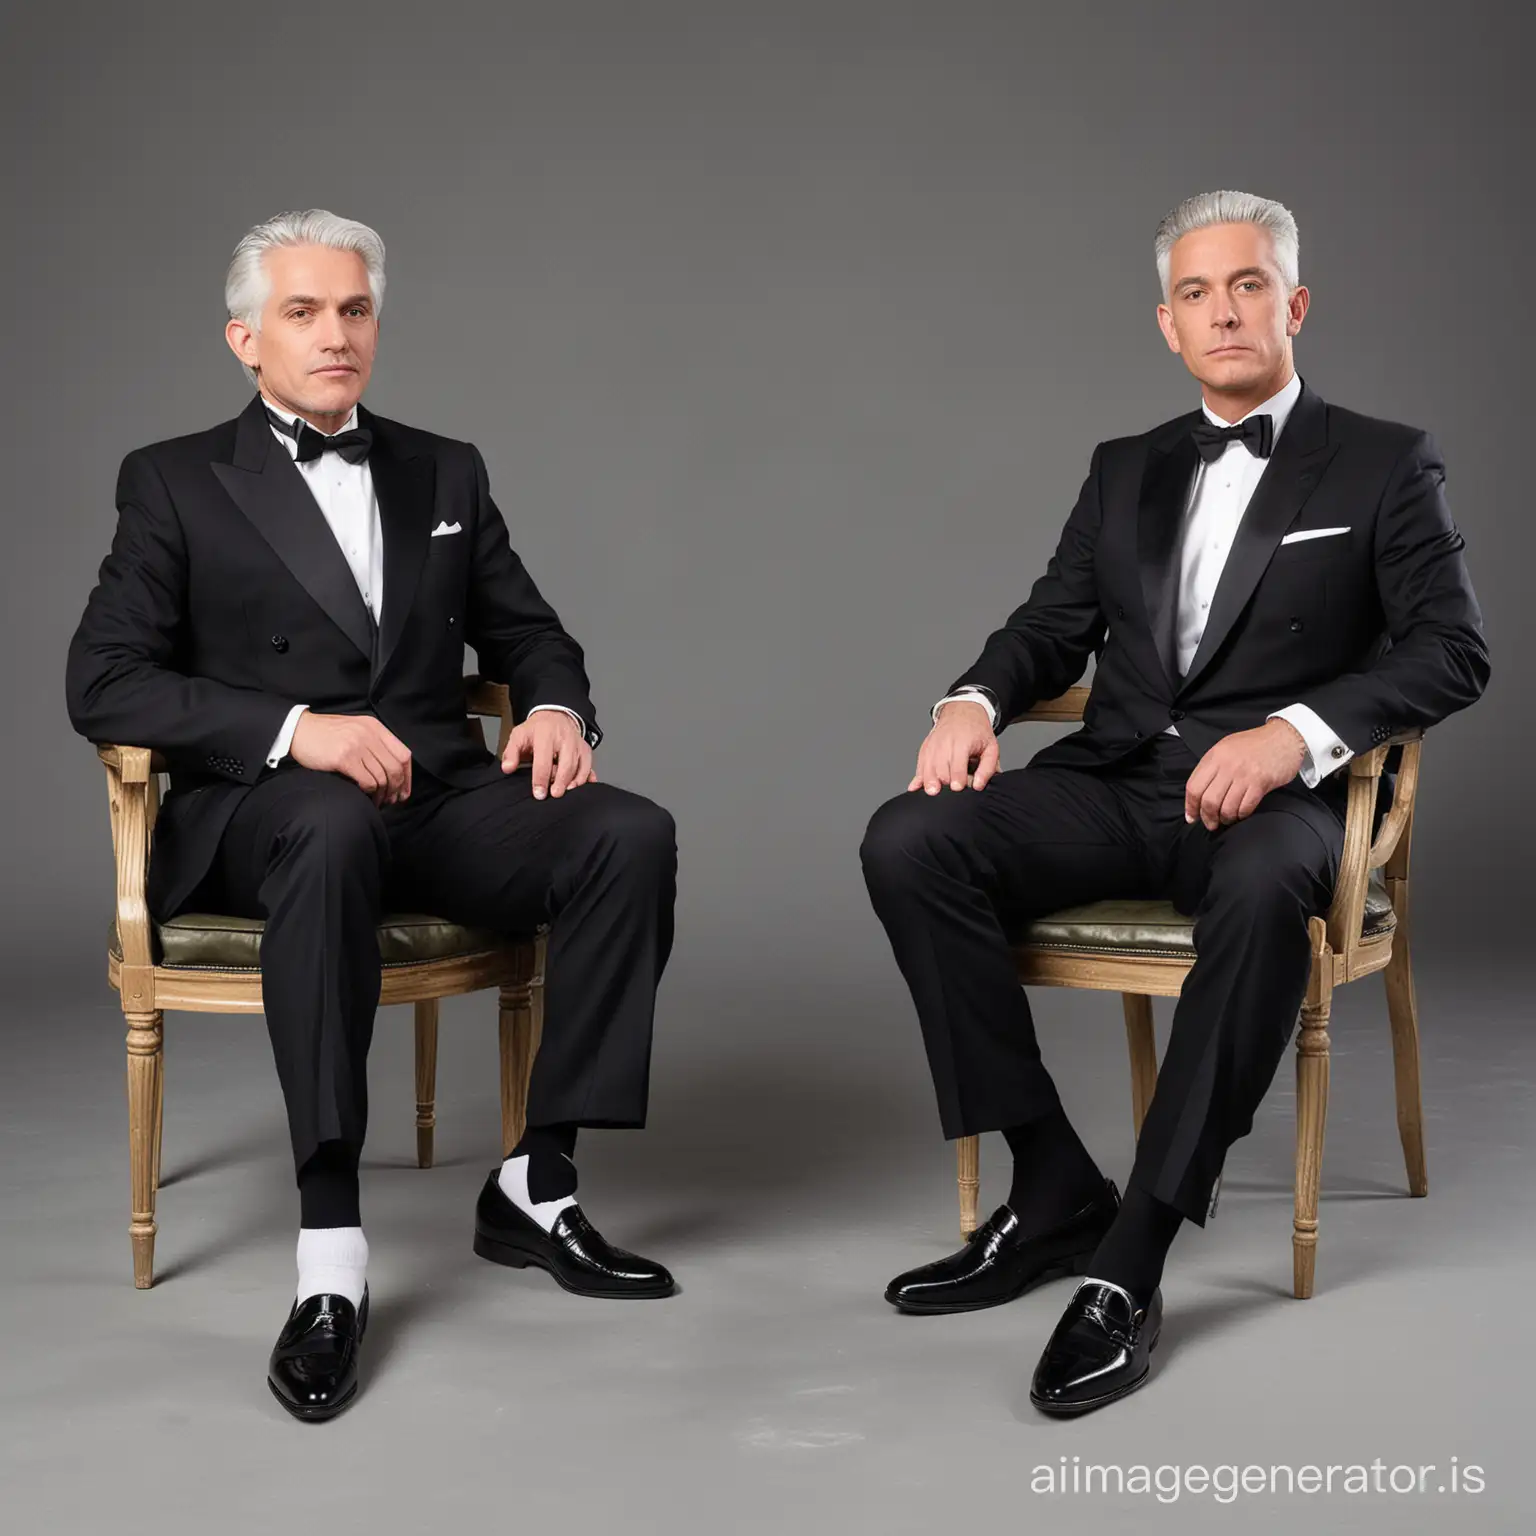 Two eldely businessmen, shot height, both wearing tuxedos, white socks, black loafers, silver hair, both sitting on the chair, must show face
Private